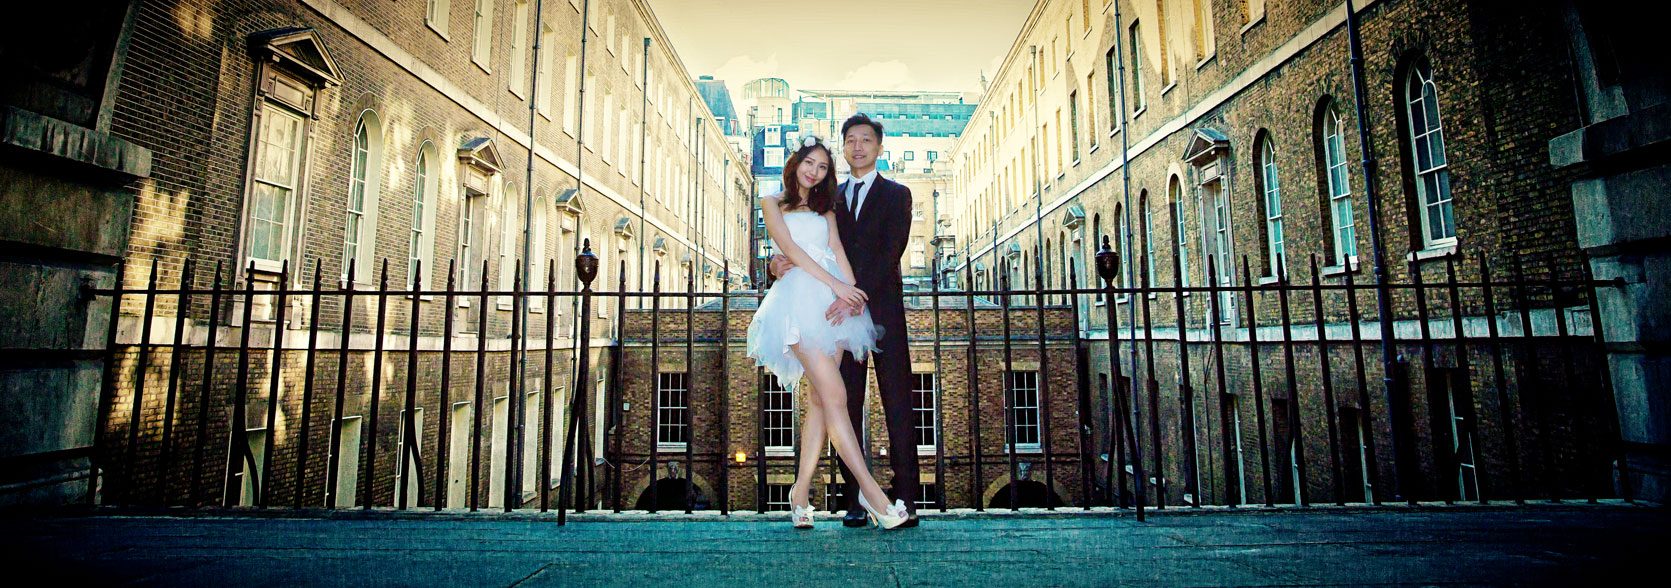 London engagement shoot with Chinese wedding couple